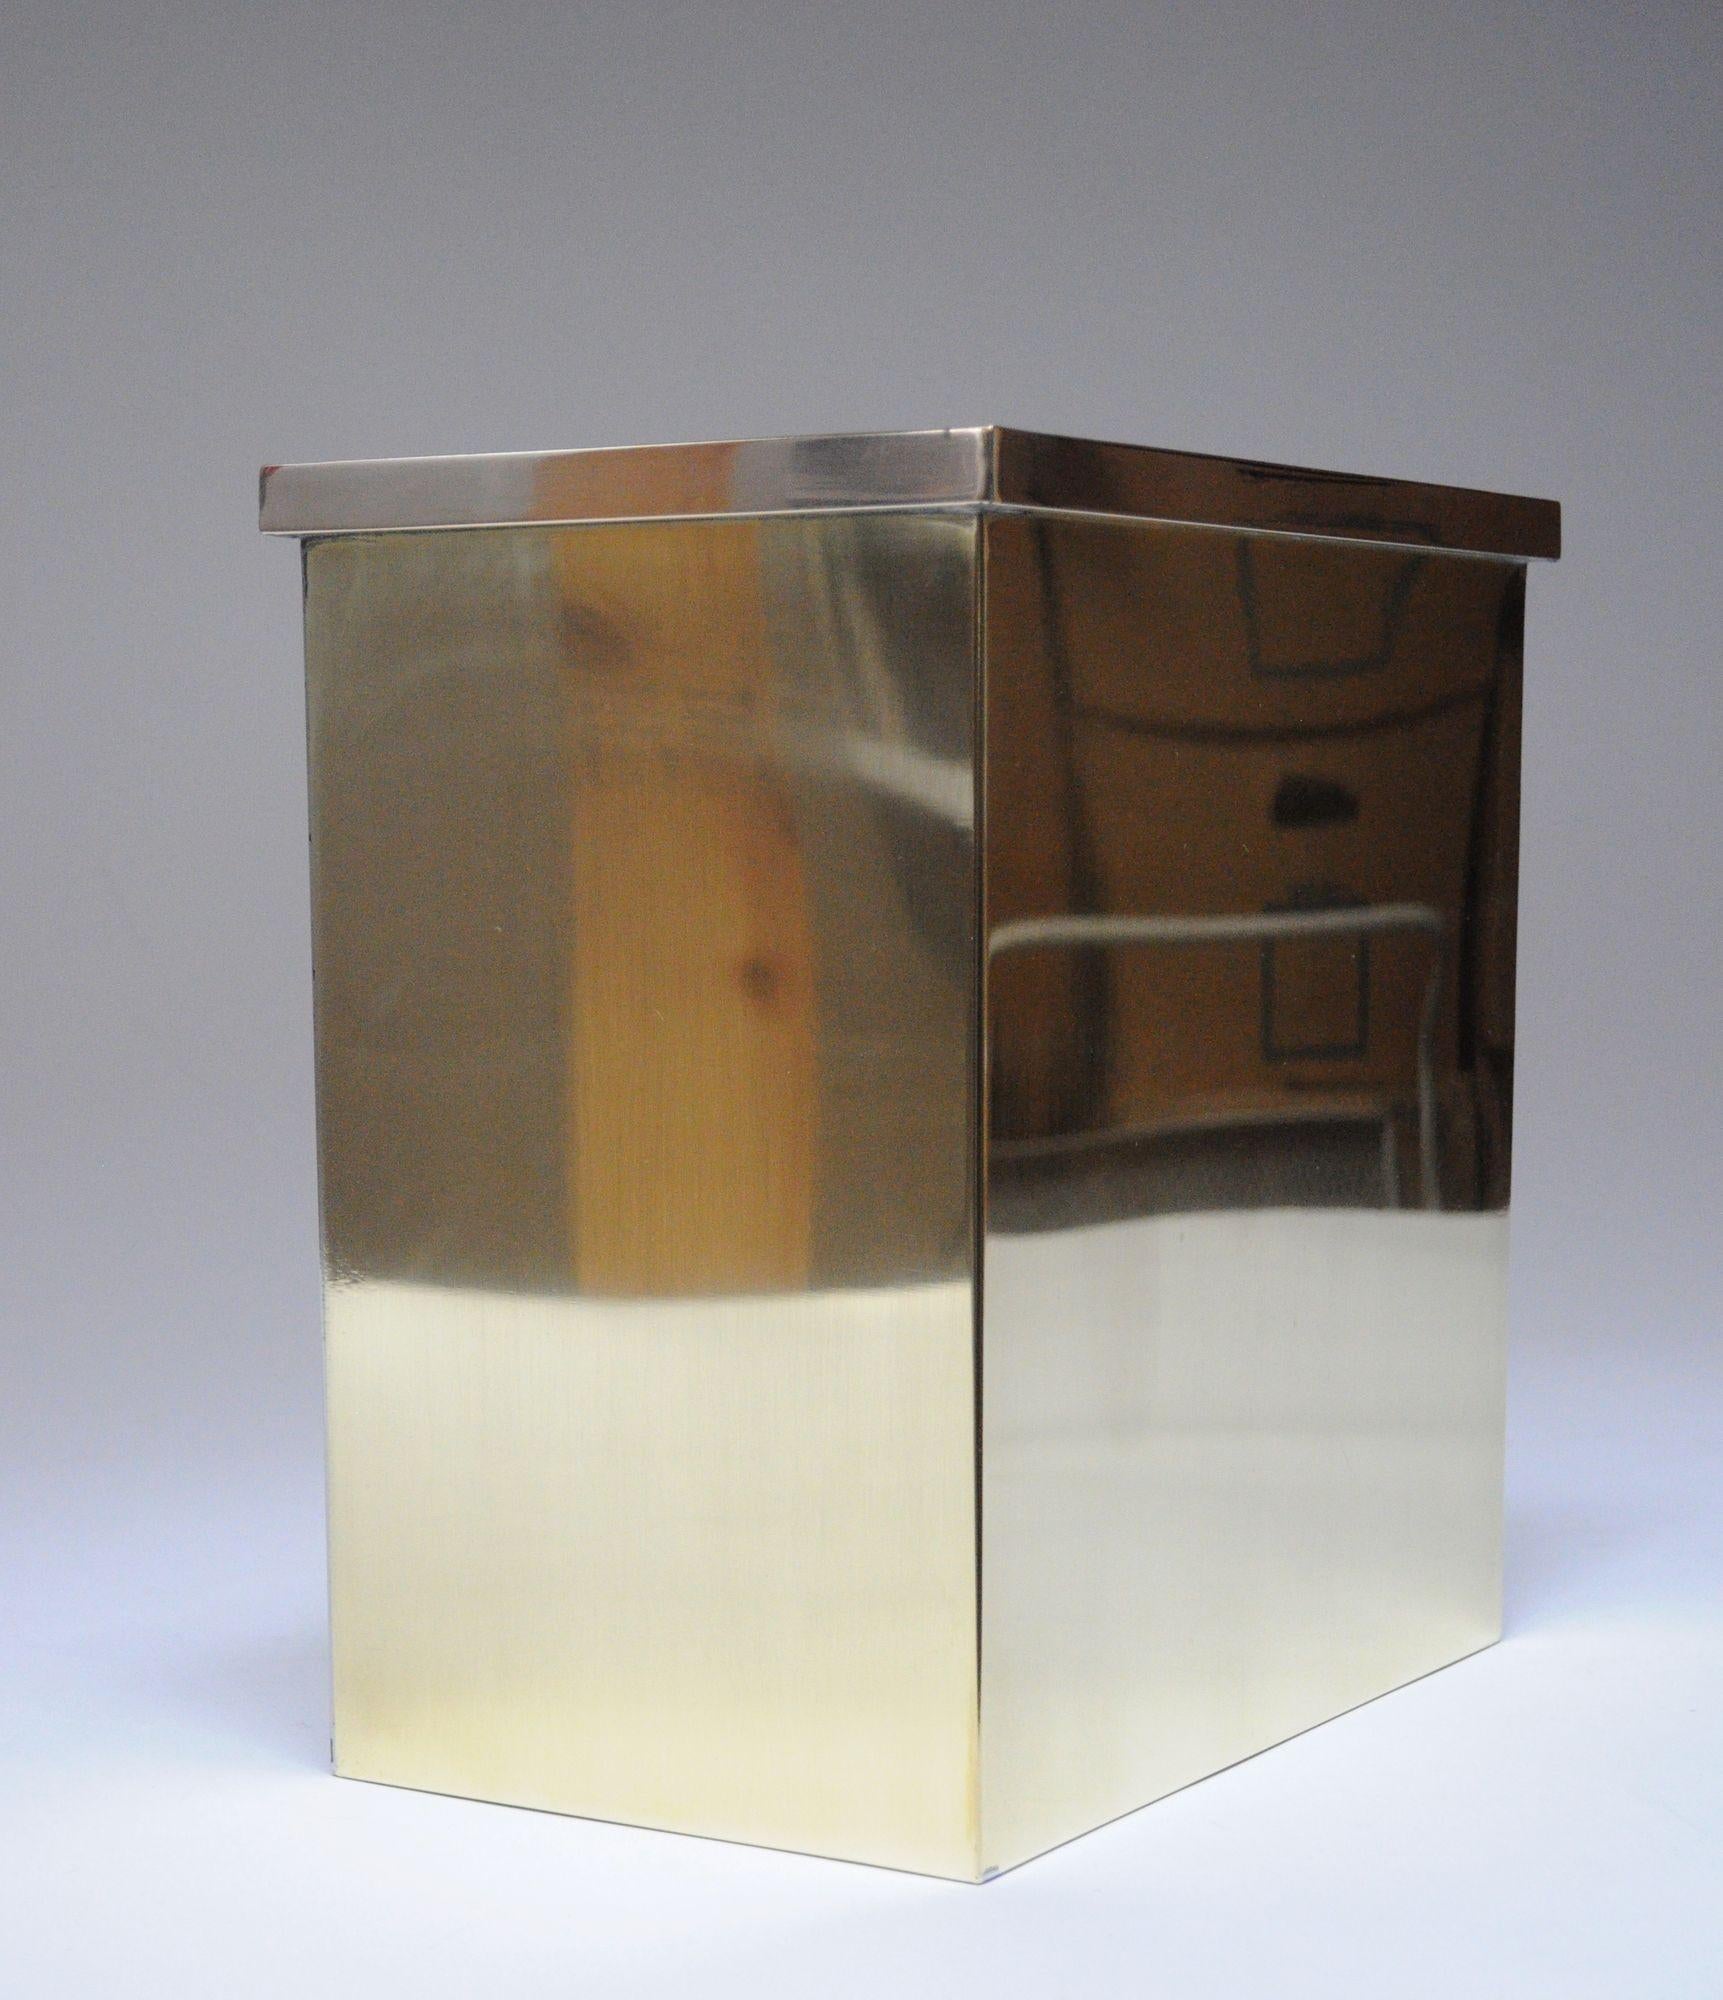 Vintage wastebasket/Umbrella Stand/Storage Box in newly polished mirrored-brass (ca. 1970, USA).
Stylish, utilitarian piece in very good, vintage condition sans some light splotches/edge wear and oxidation to the interior from use/age.
H: 12